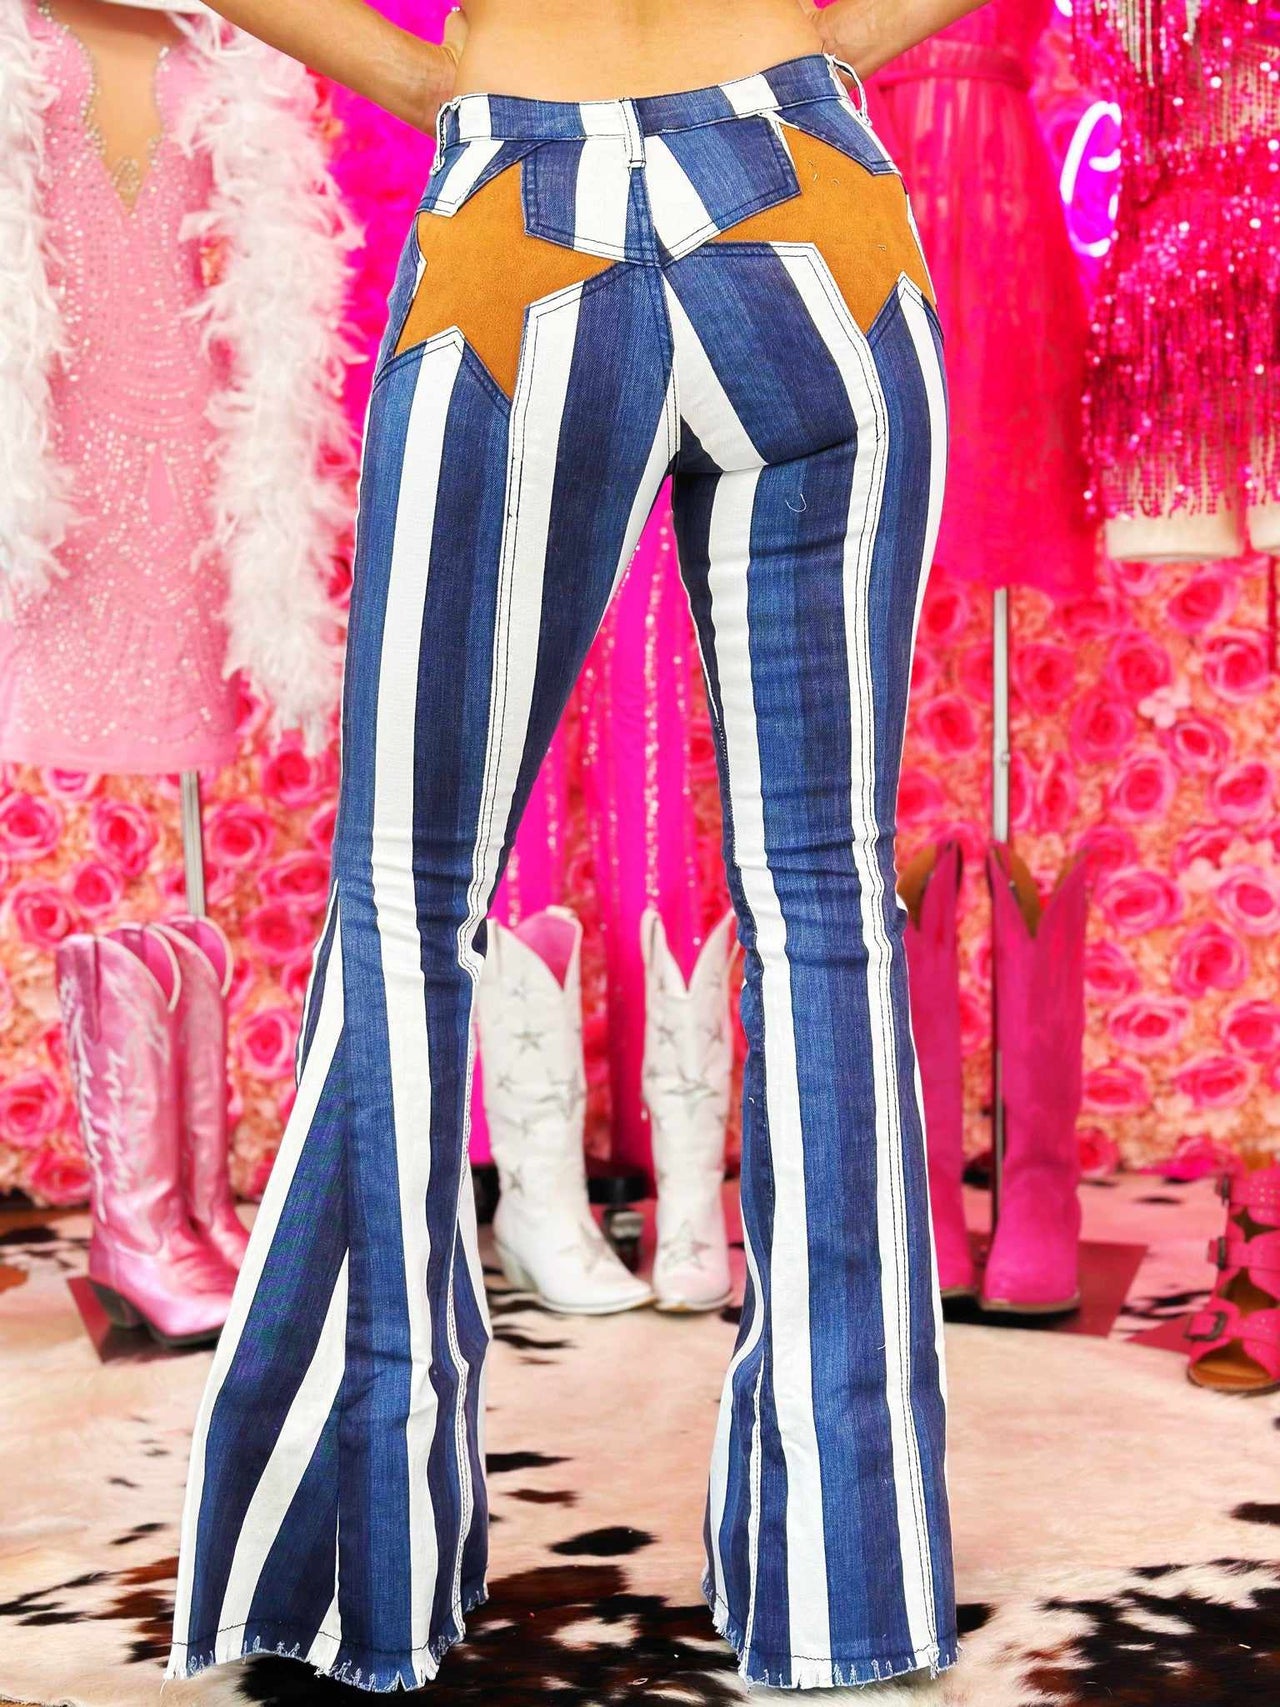 All Eyes On You Striped Flares - Navy